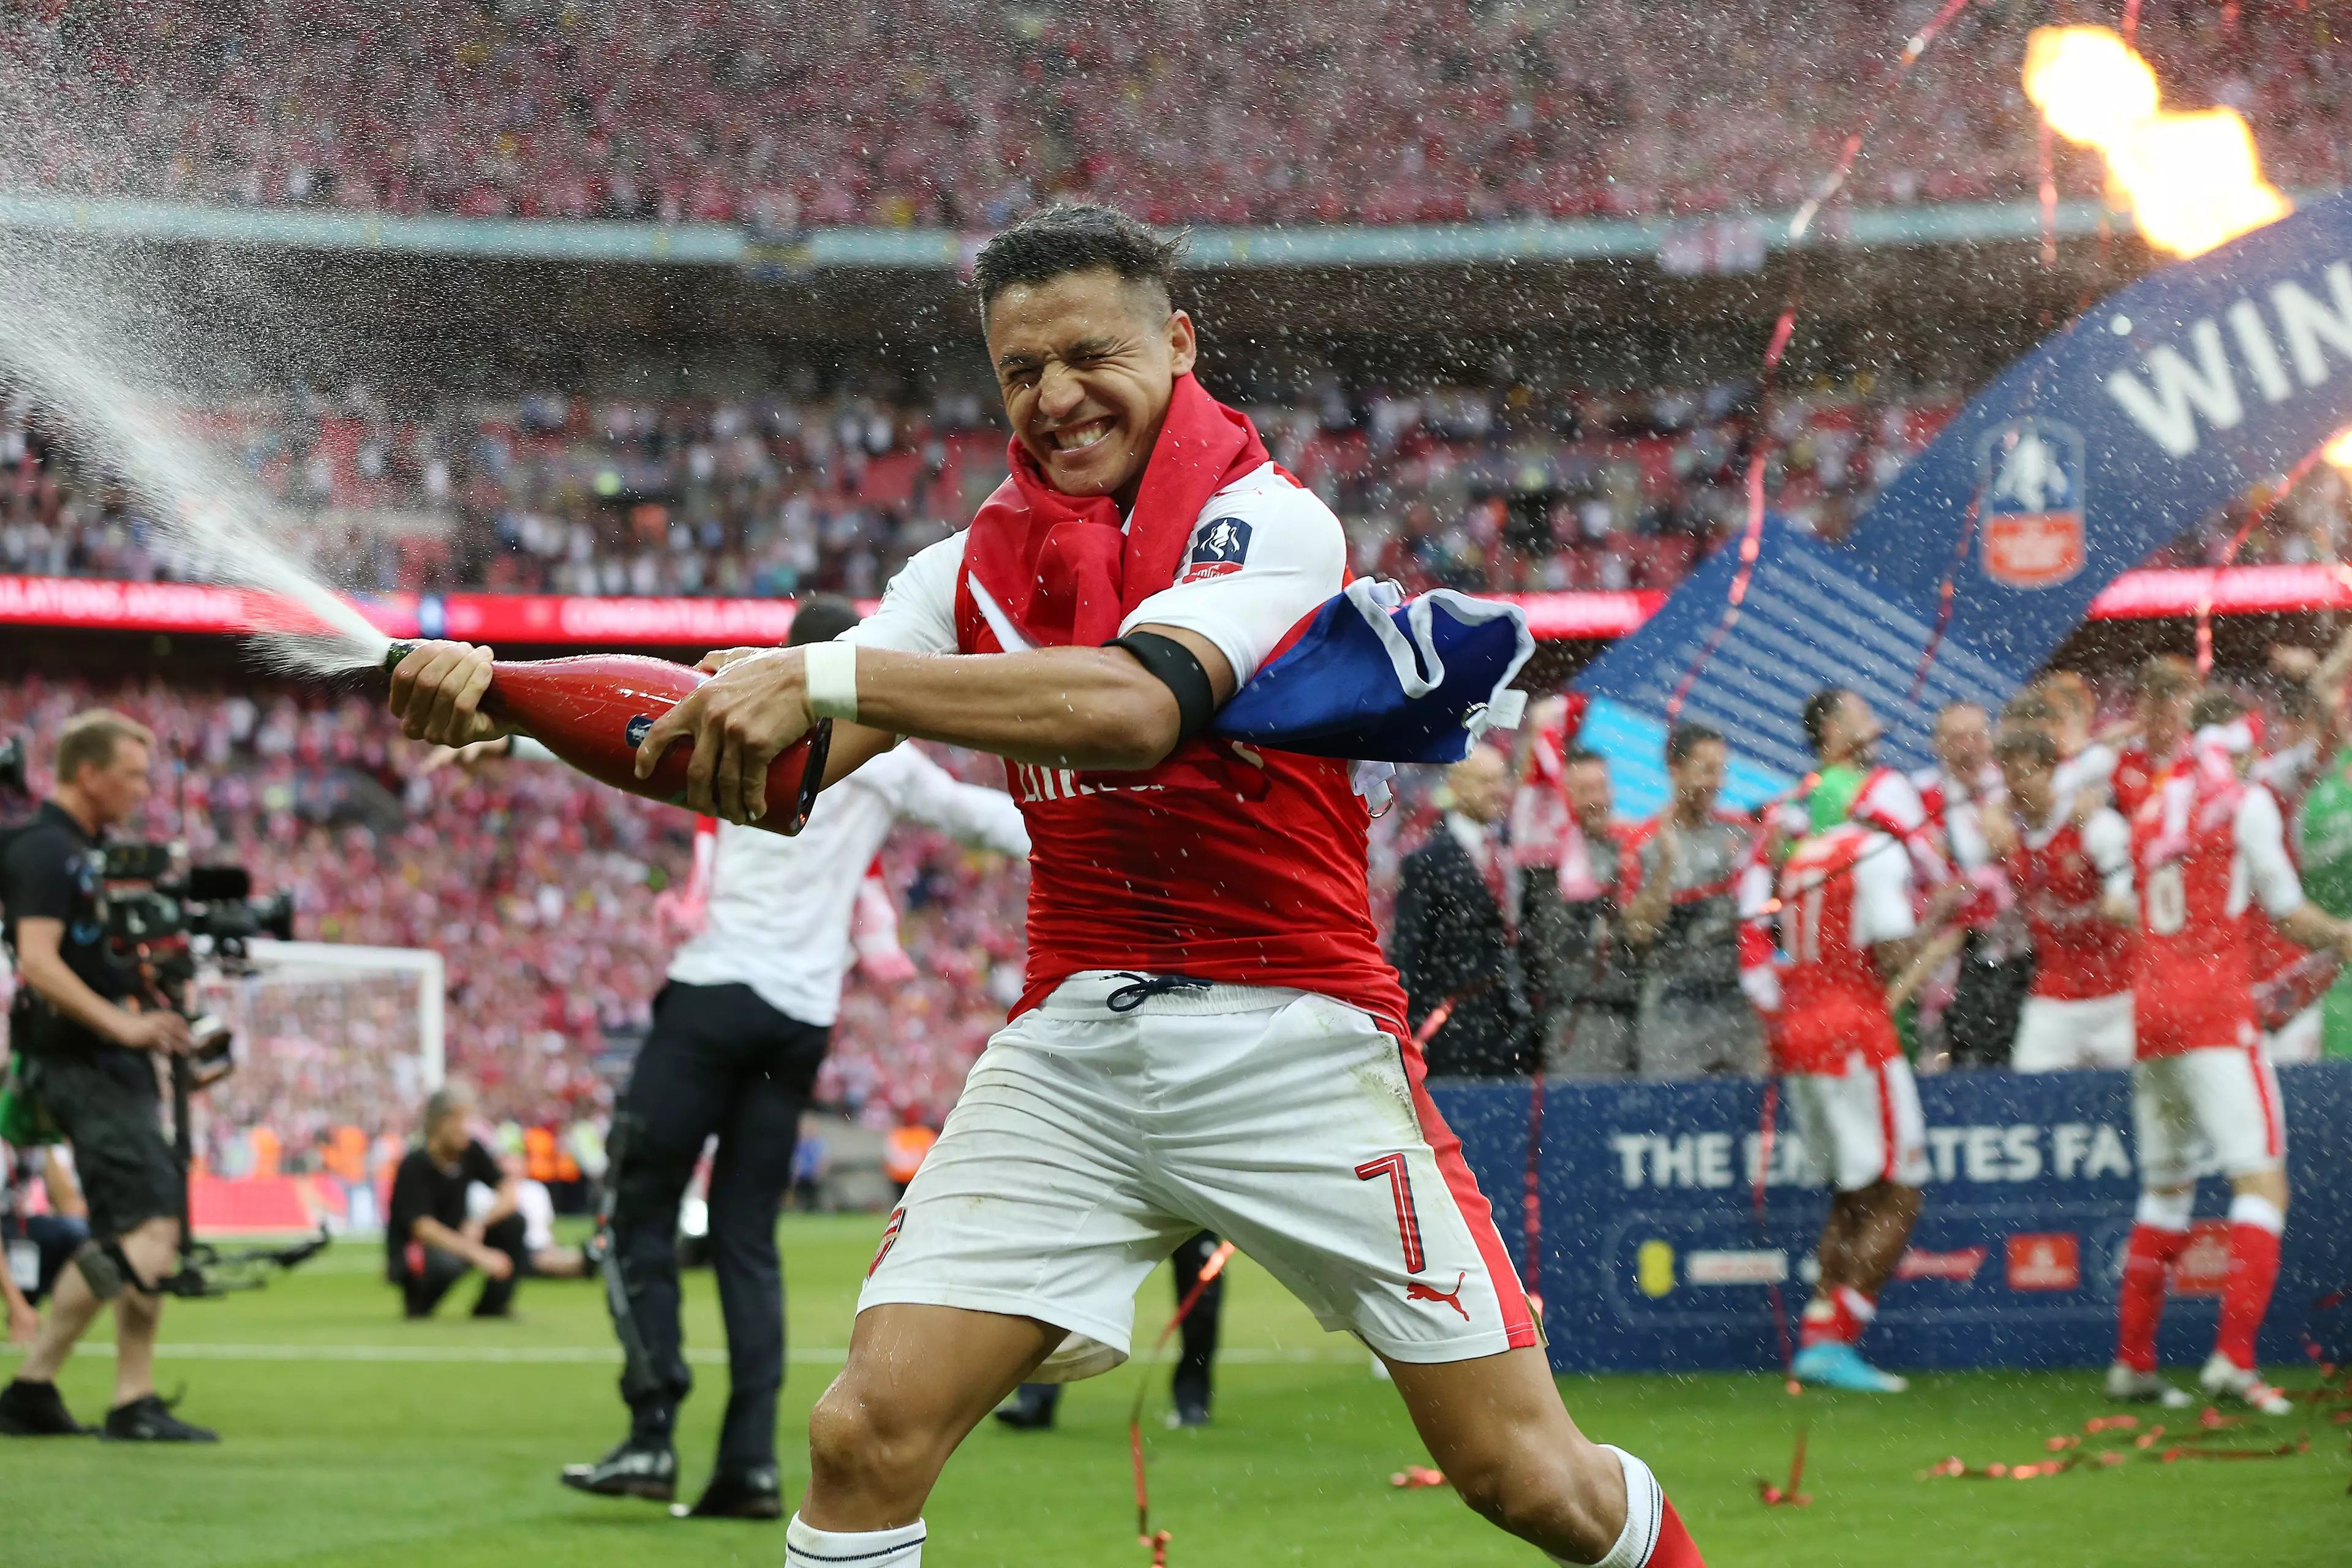 Things haven't been good for Sanchez at United. In happier times (bottom) winning the FA Cup with Arsenal. Images: PA Images